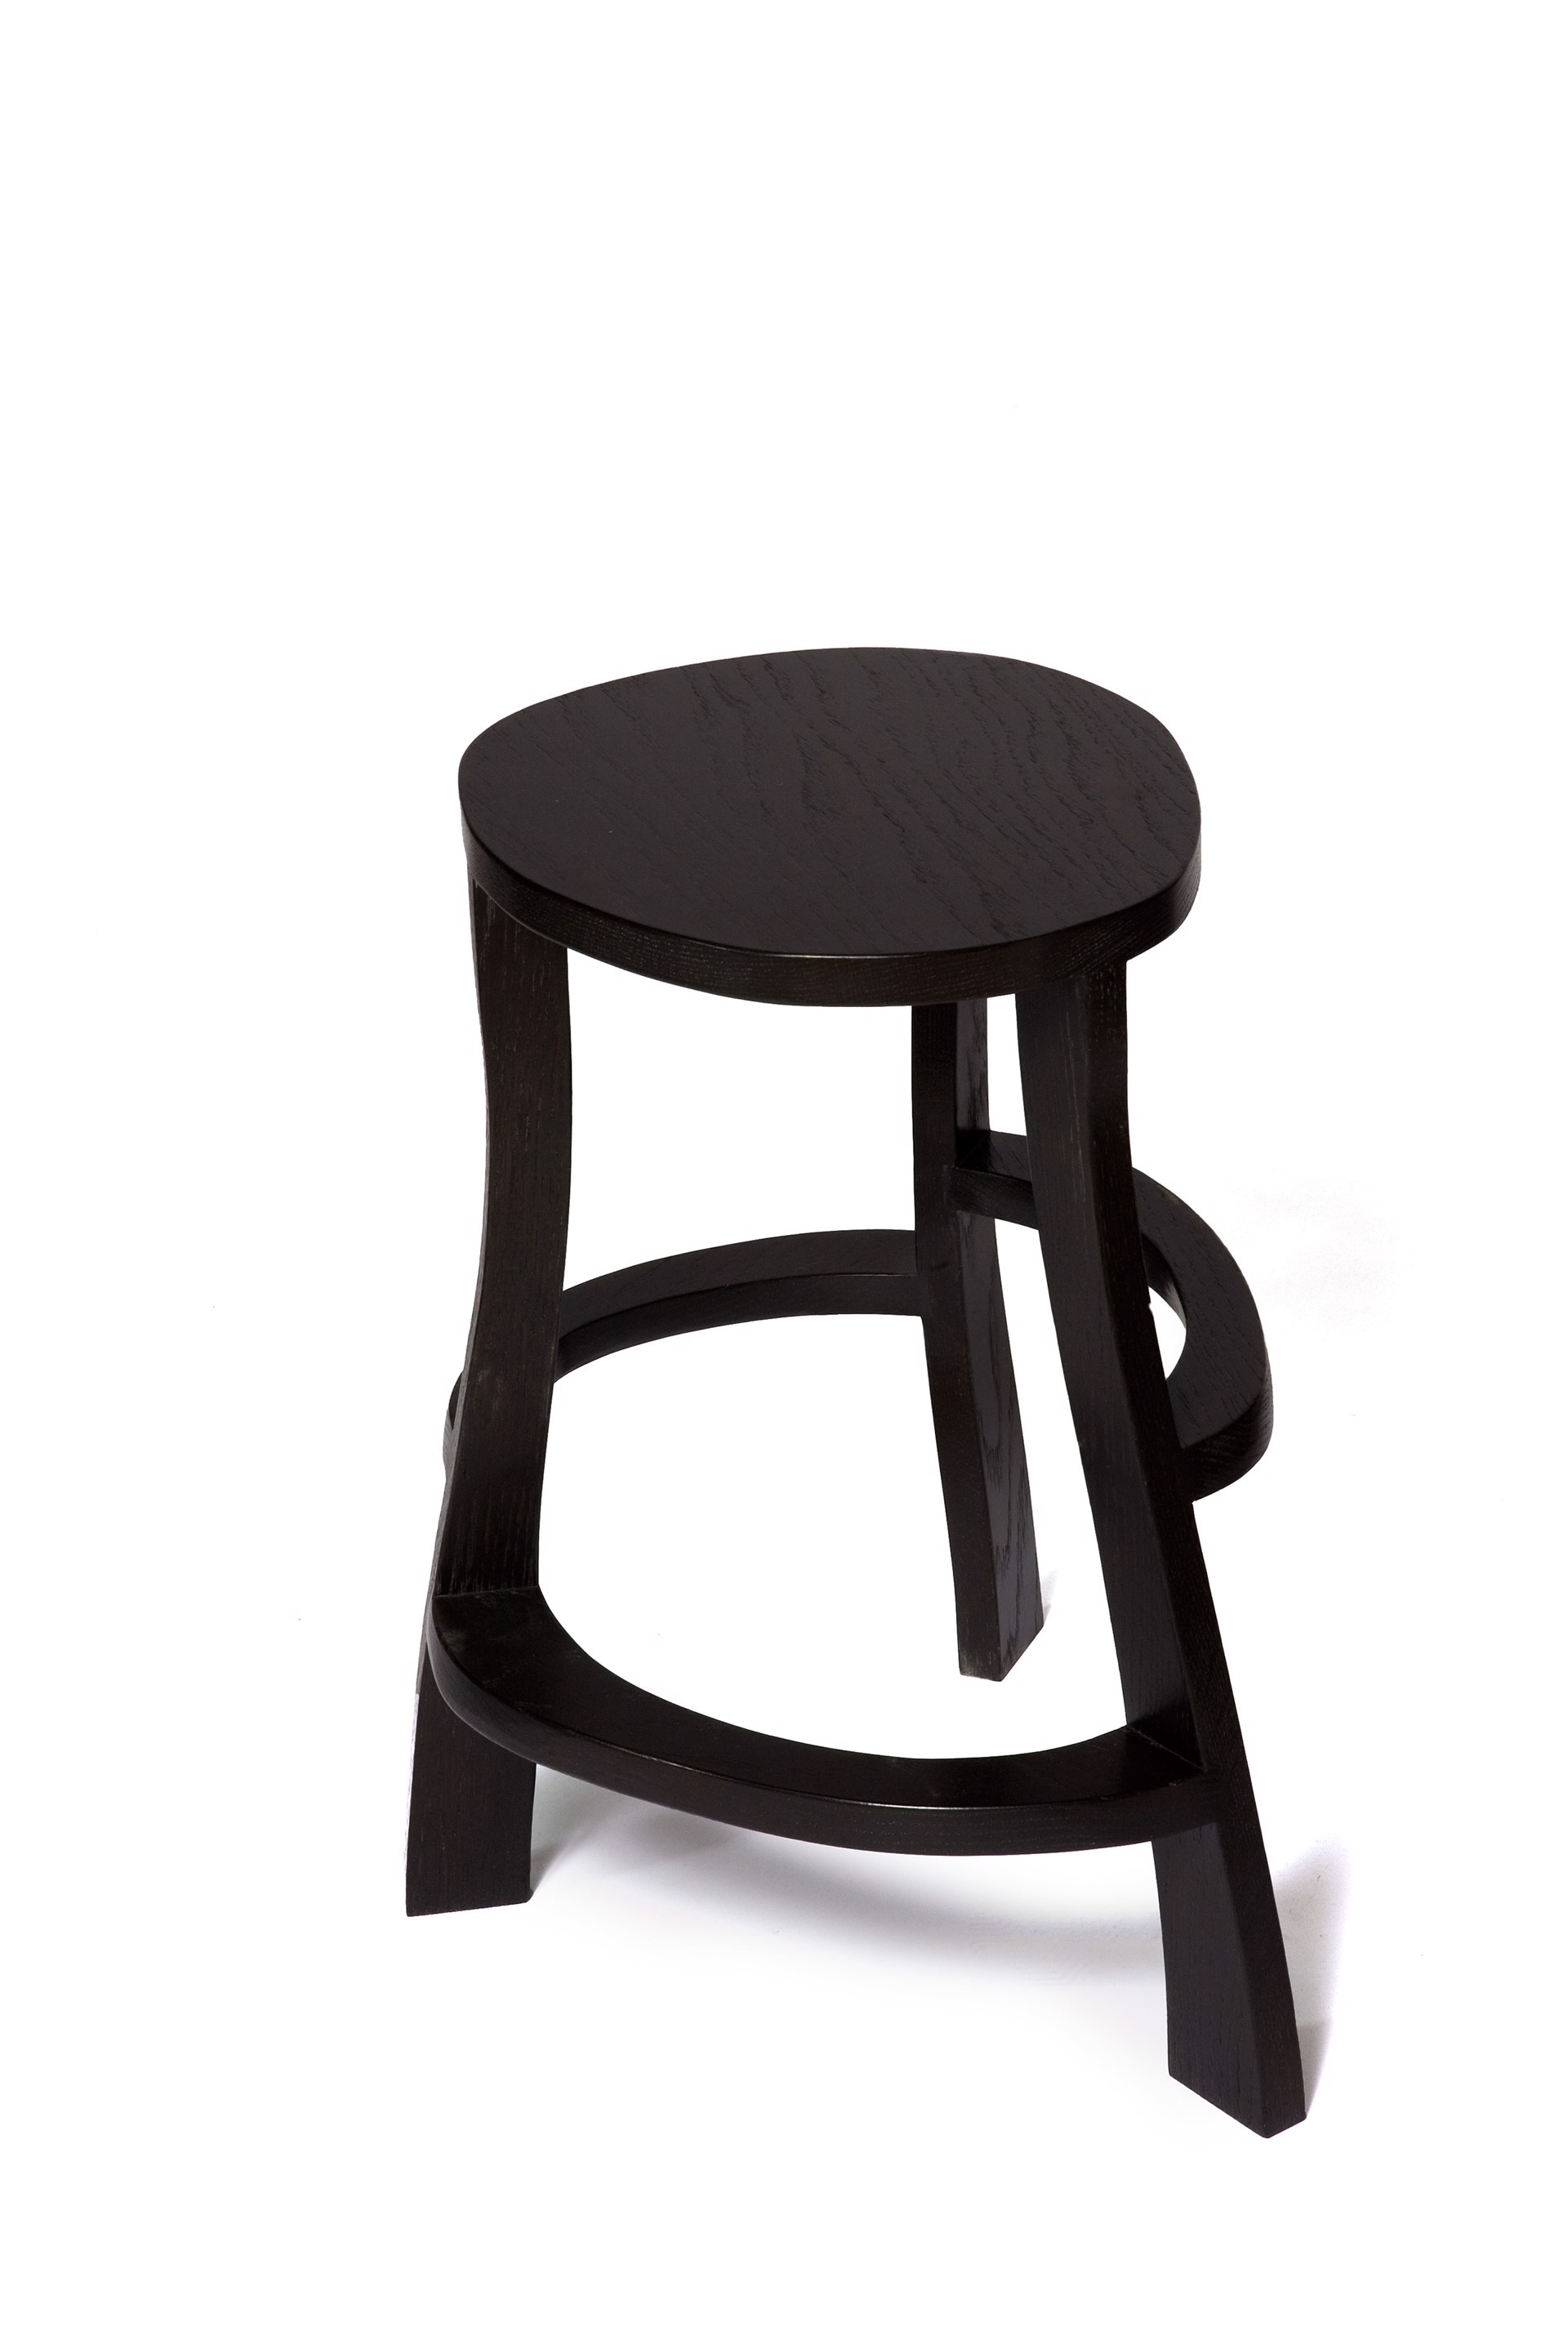 "Meanders" Stool by Jacques Jarrige